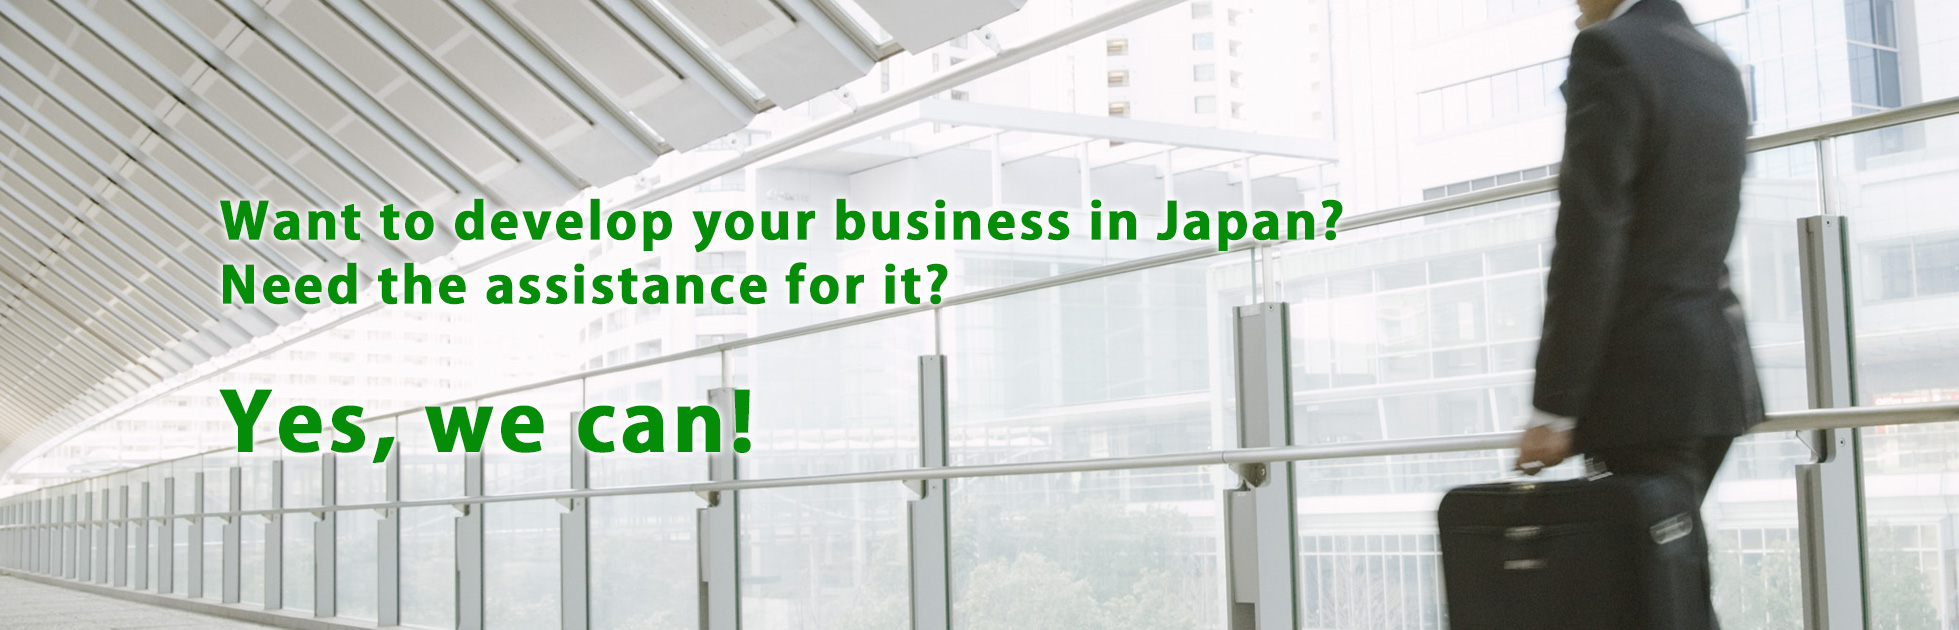 Want to develop your buisiness in Japan? Yes, we can!